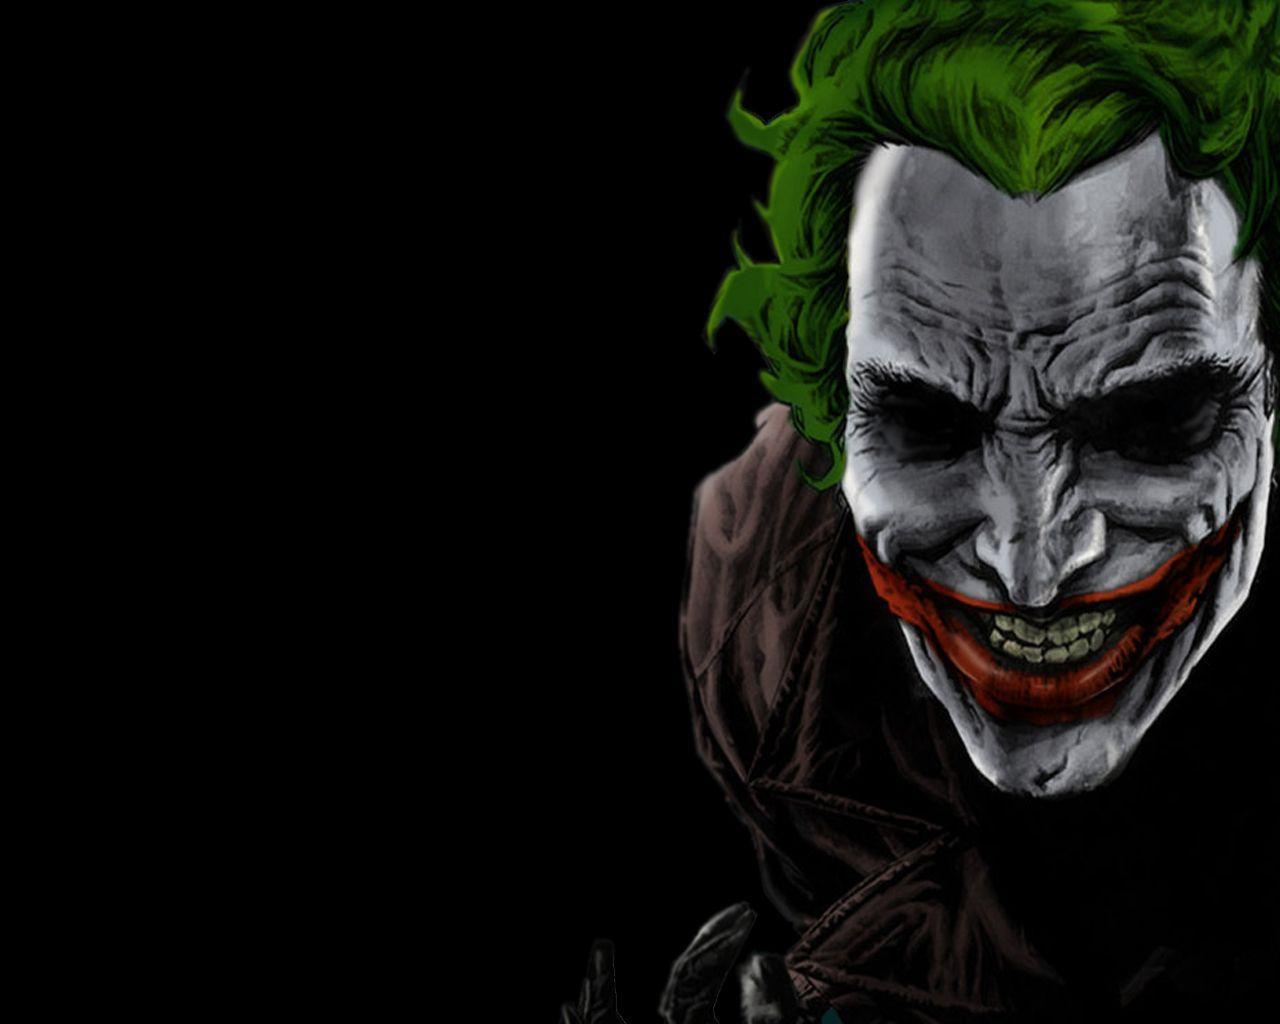 The Joker high resolution picture